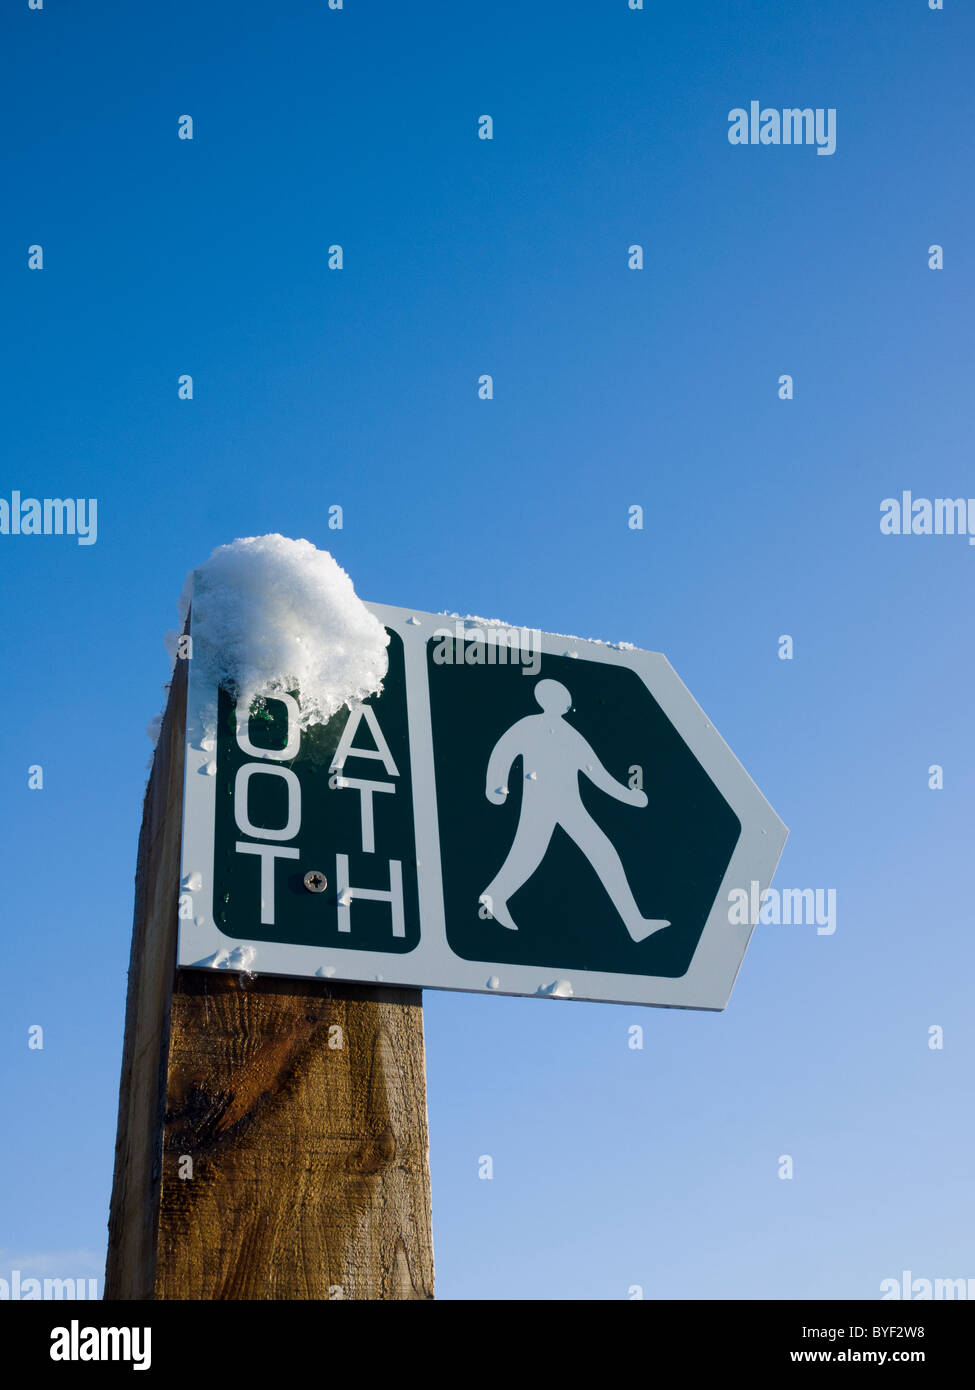 Footpath sign with snow against a blue sky. Wrington, North Somerset, England. Stock Photo